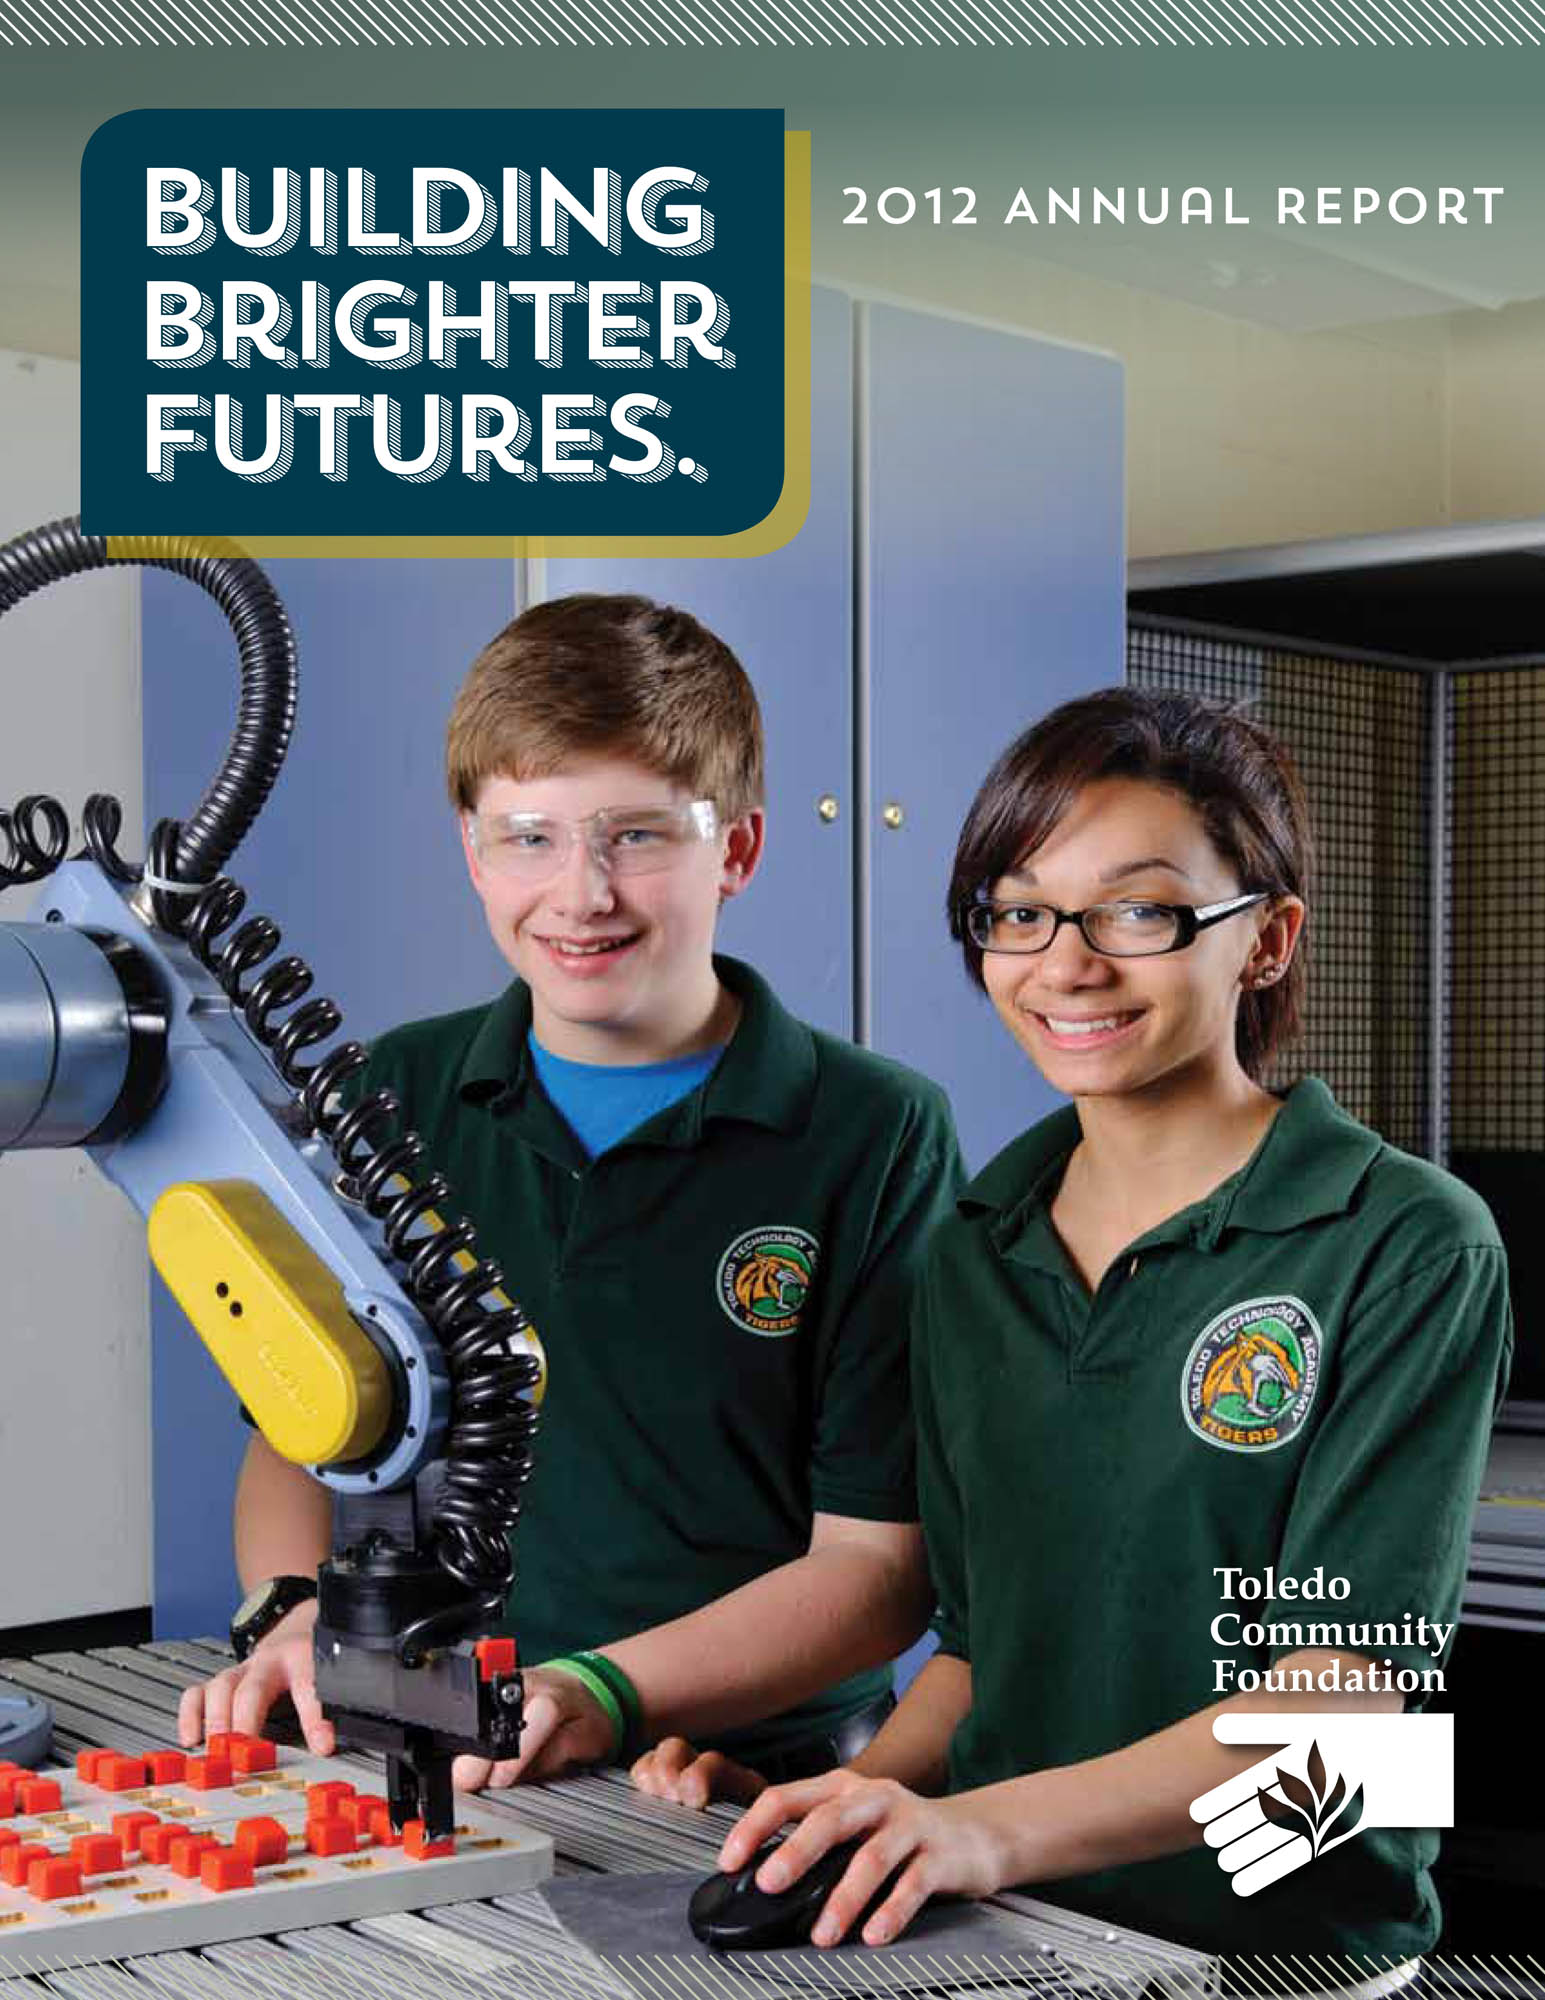 Community Foundation Annual Report cover portrait of students